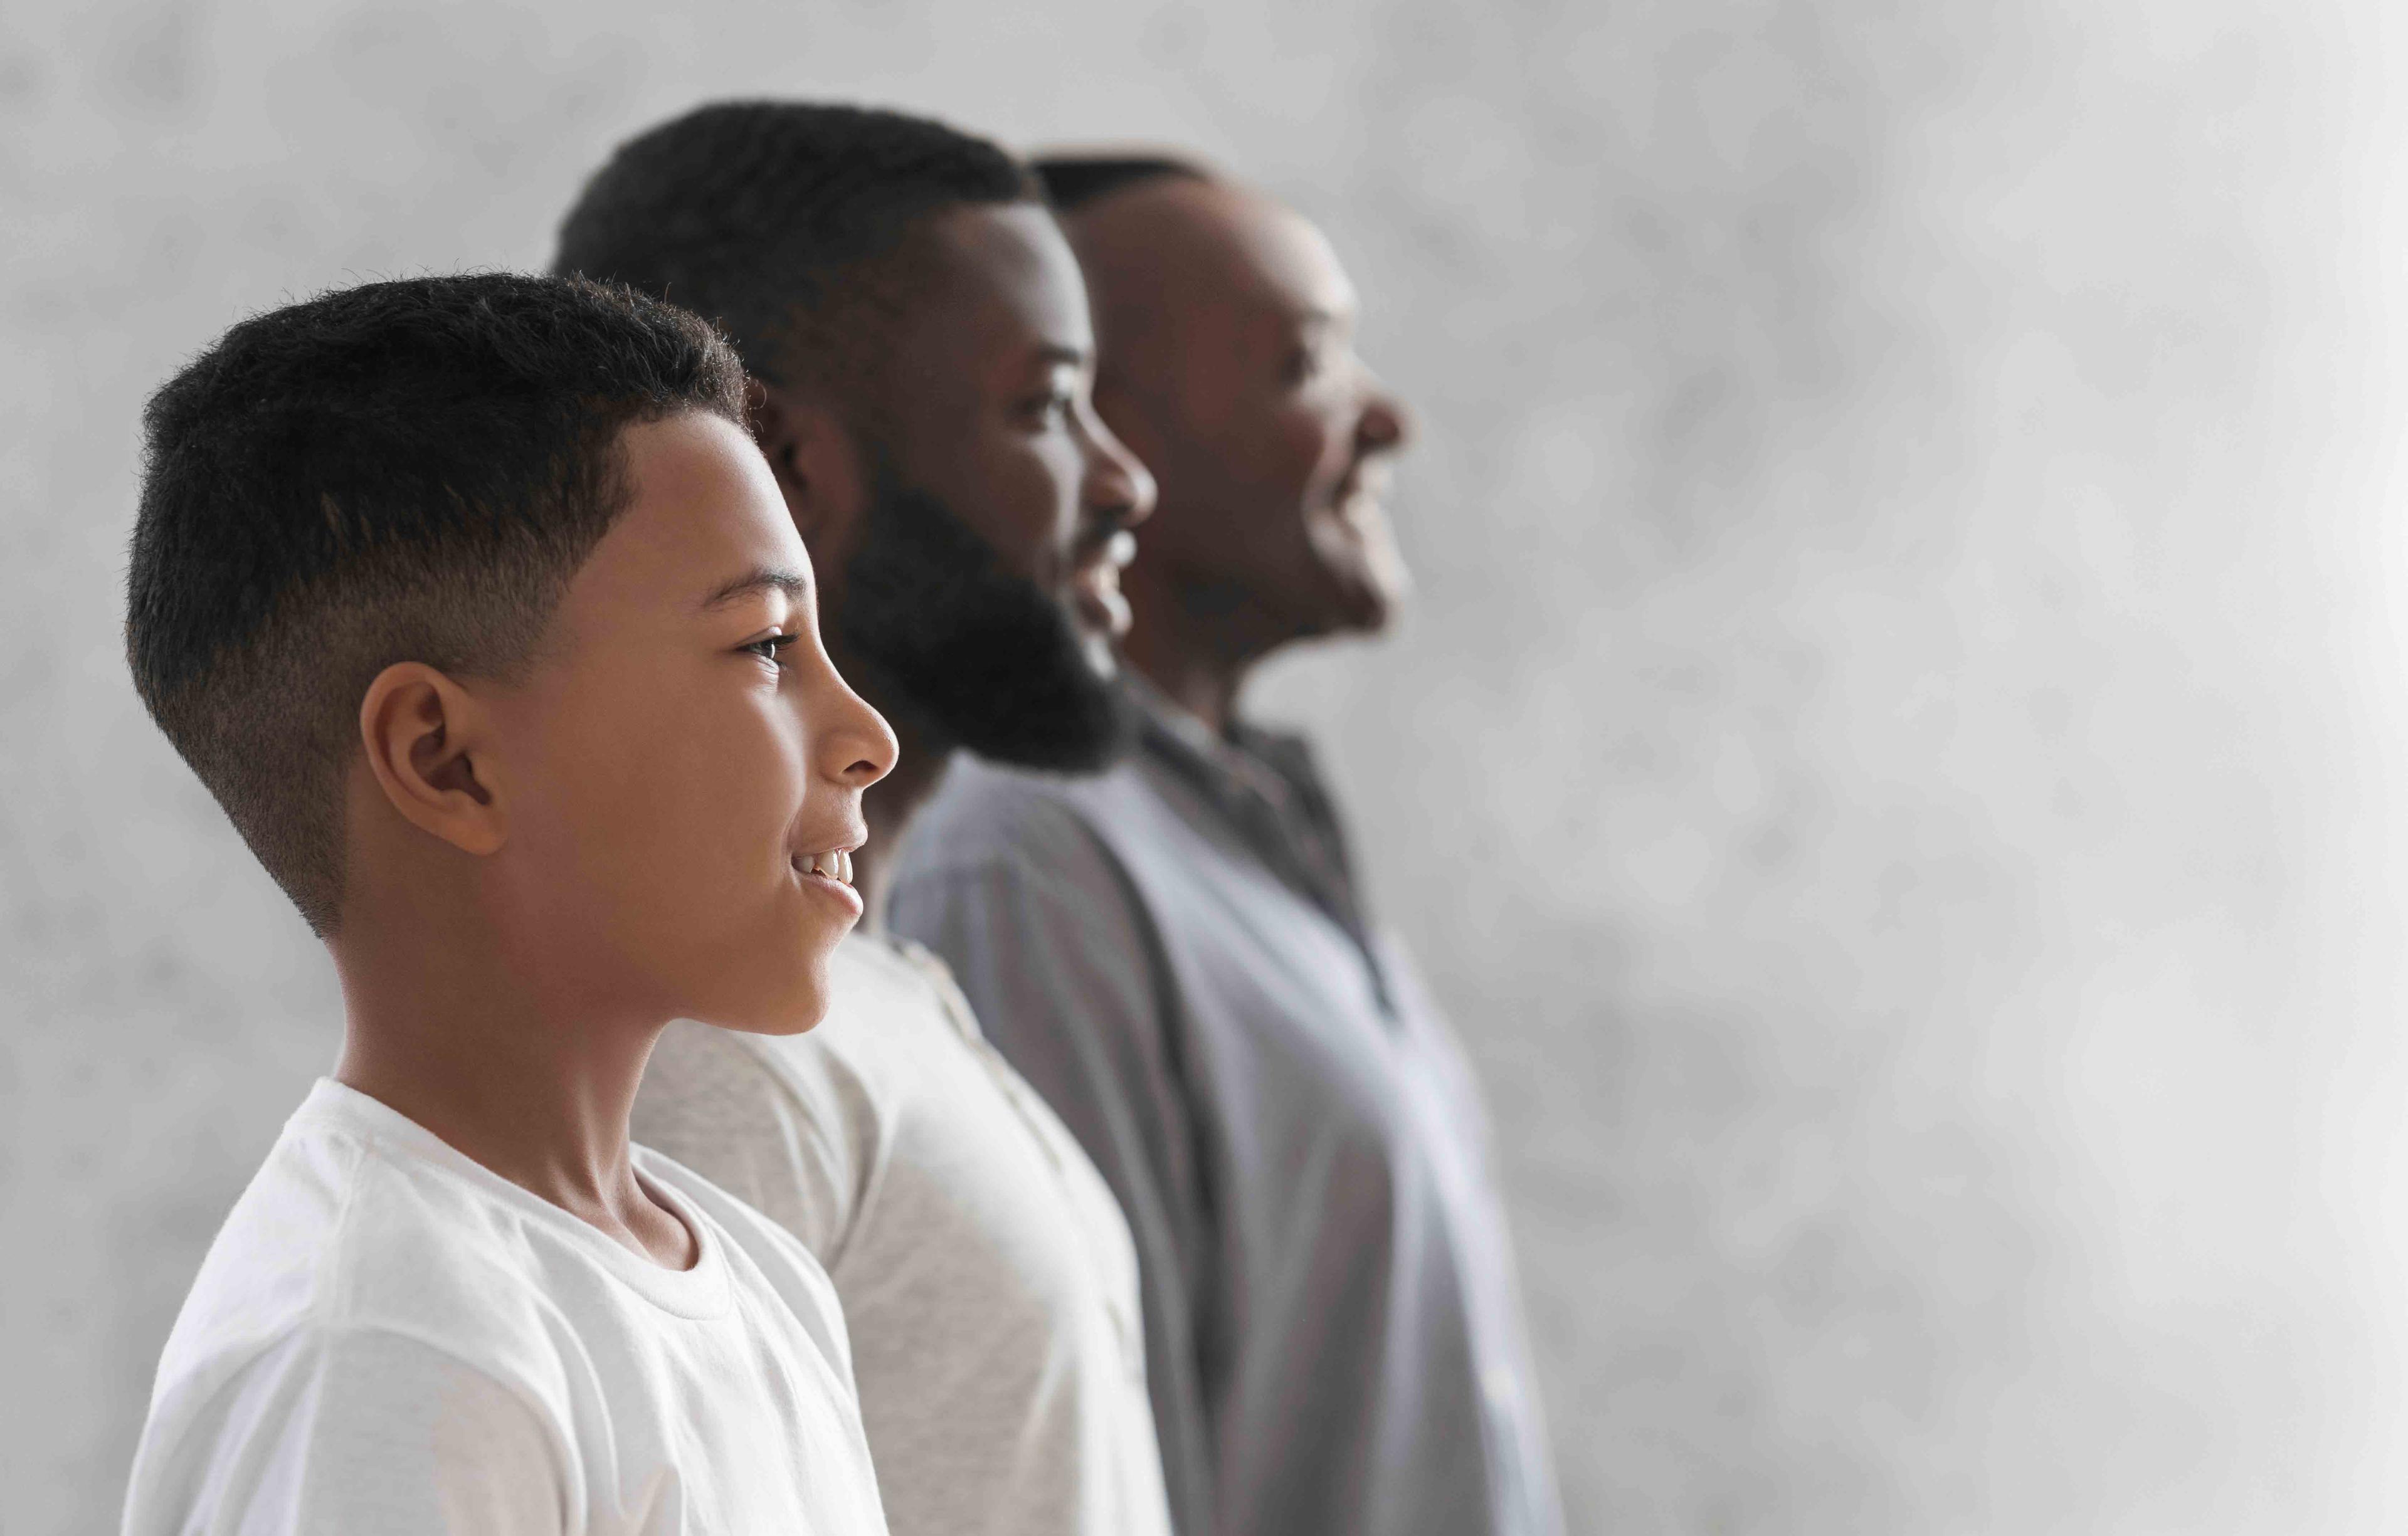 Side profile portraits of youth, adult and elderly male of African descent depicting role of testosterone and DHT in men's health and development.